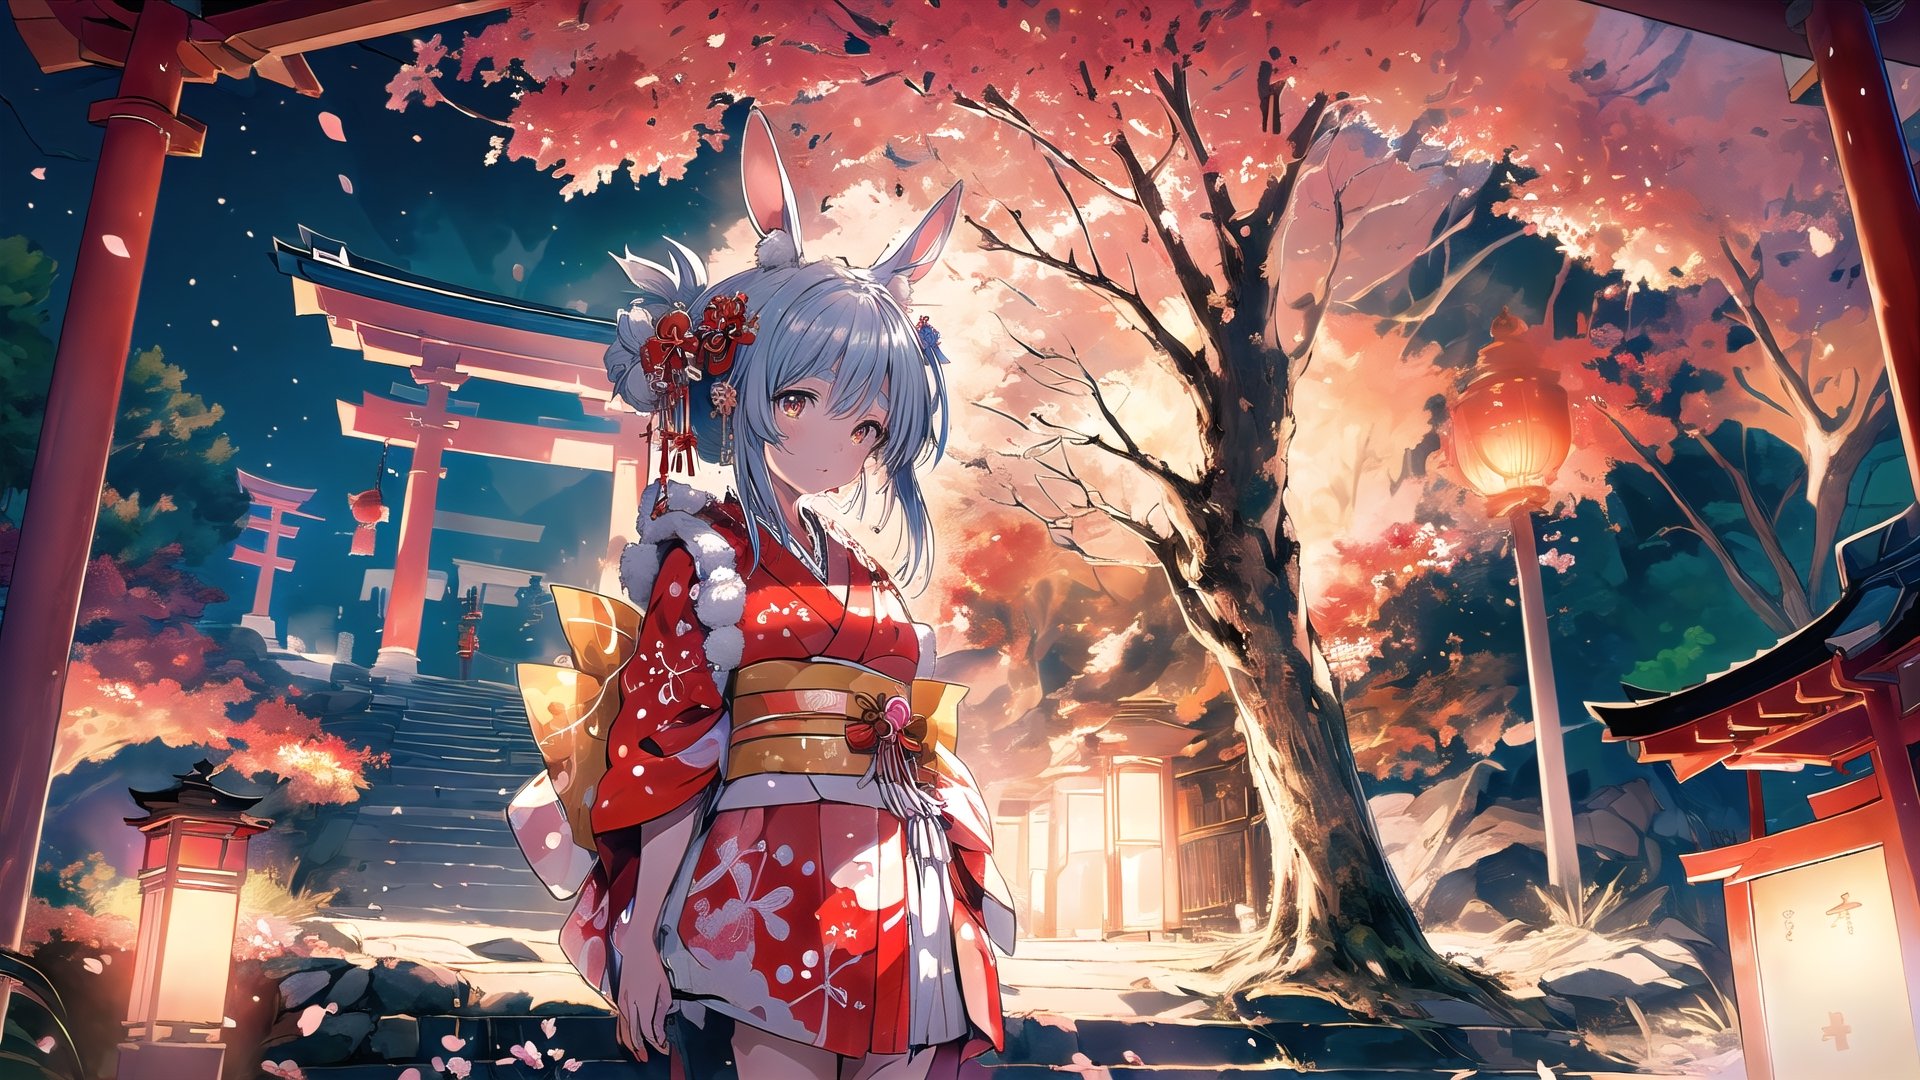 //Quality
(((best quality, 8k wallpaper))), ((detailed eyes, detailed illustration, masterpiece, ultra-detailed)),

//Charater
1girl, solo, usada pekora, 
kimono1, (red kimono:1.5), wearing kimono, wearing new year kimono, 

// Pose
upper body, (dynamic angle), 
looking at viewer, 

// Background
((detailed background)), midjourney, yofukashi background,perfect light, (cherry blossoms), extremely delicate and beautiful, ((background: shrine, night stars iridescent)), ((nightime, detailed stars)), Night view in the shrine, A girl prays in front of a shrine at night, behind her is a row of lanterns and a red torii gate,midjourney,1 girl